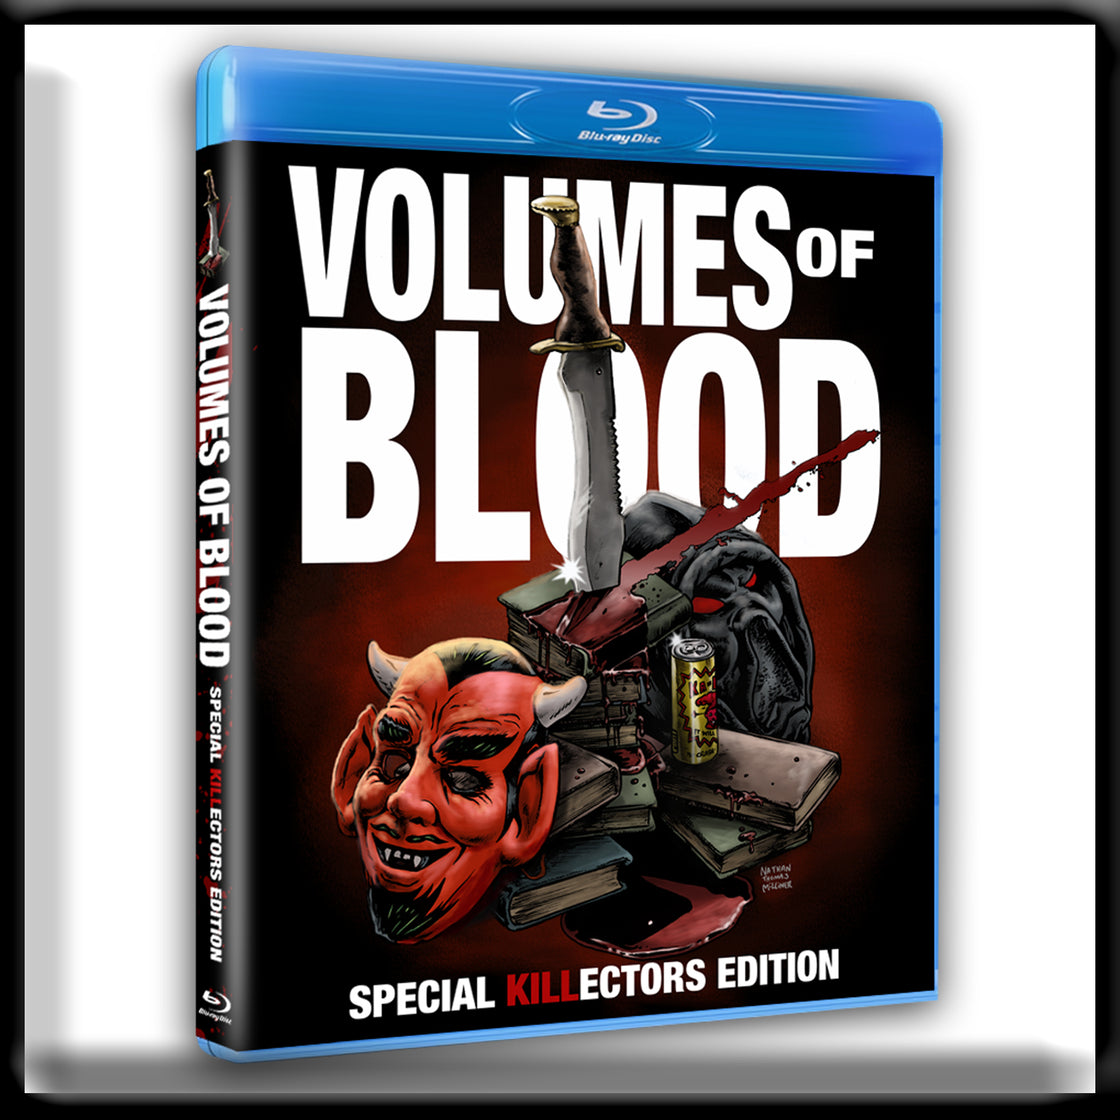 Volumes of Blood - Special Killectors Edition (Blu-ray)